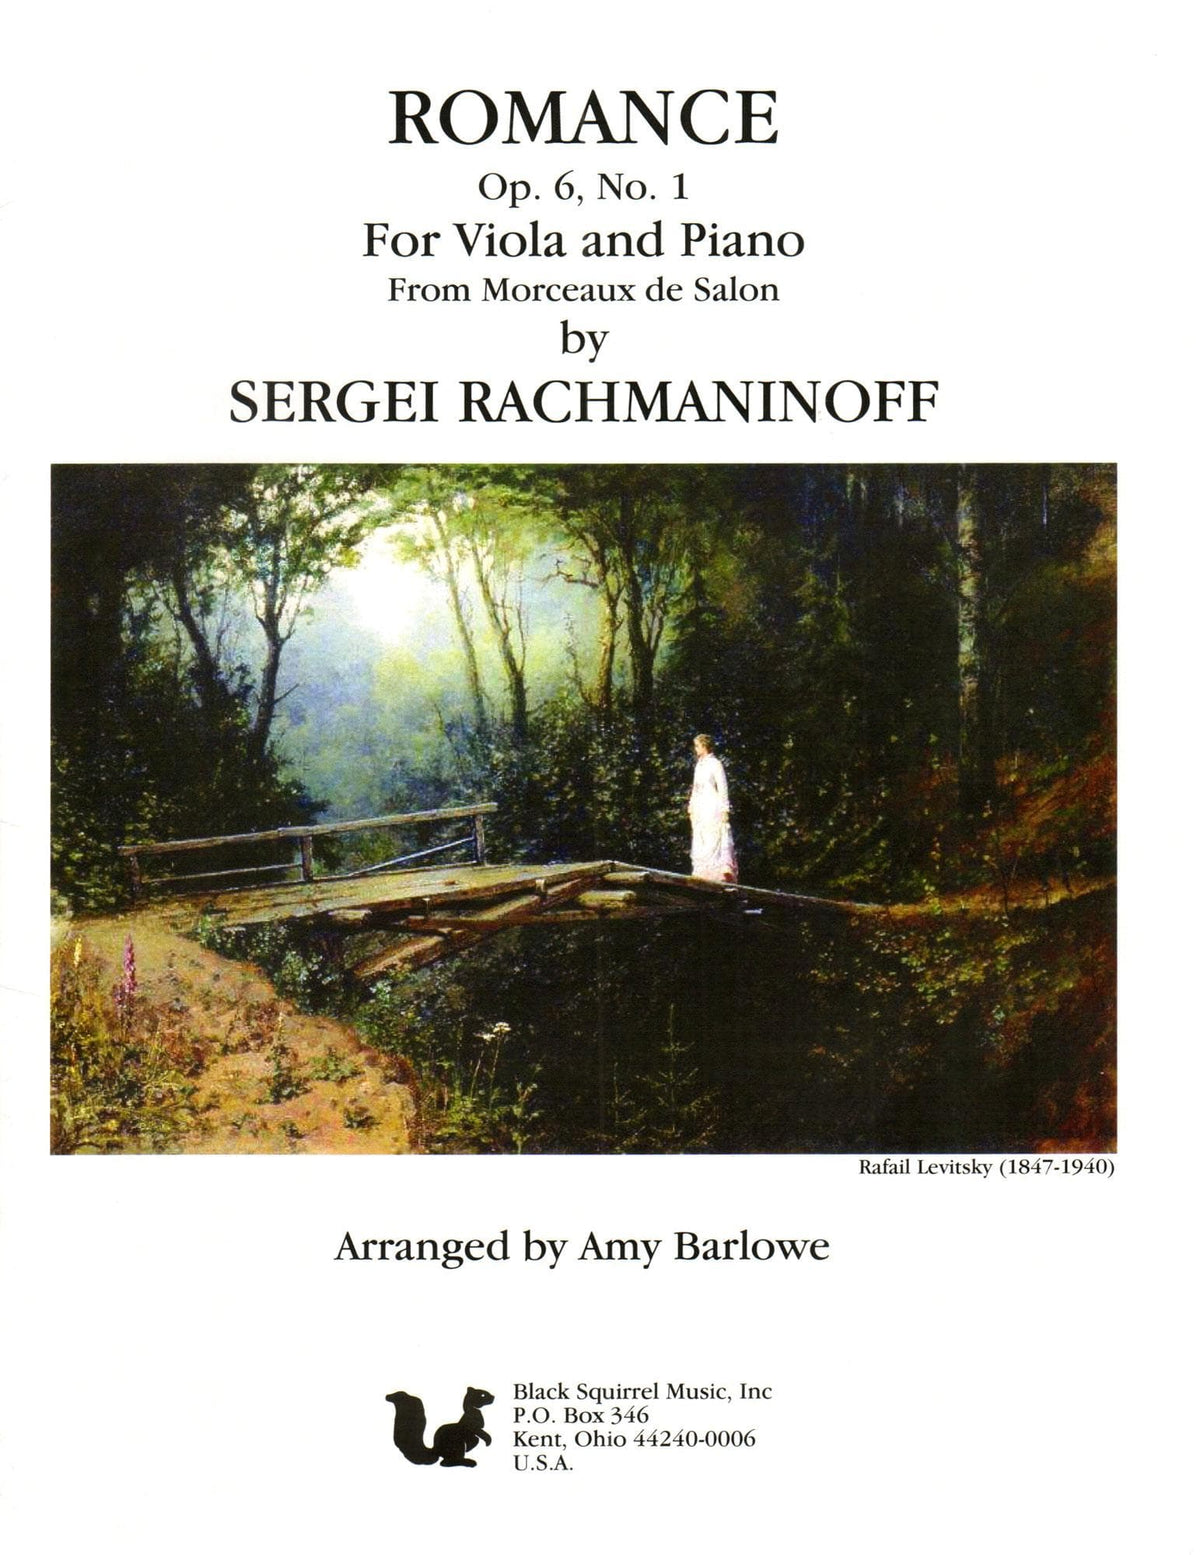 Rachmaninoff, Sergey - Romance from Morceaux de Salon, Op. 6, No. 1 - for Viola and Piano - Black Squirrel Publications